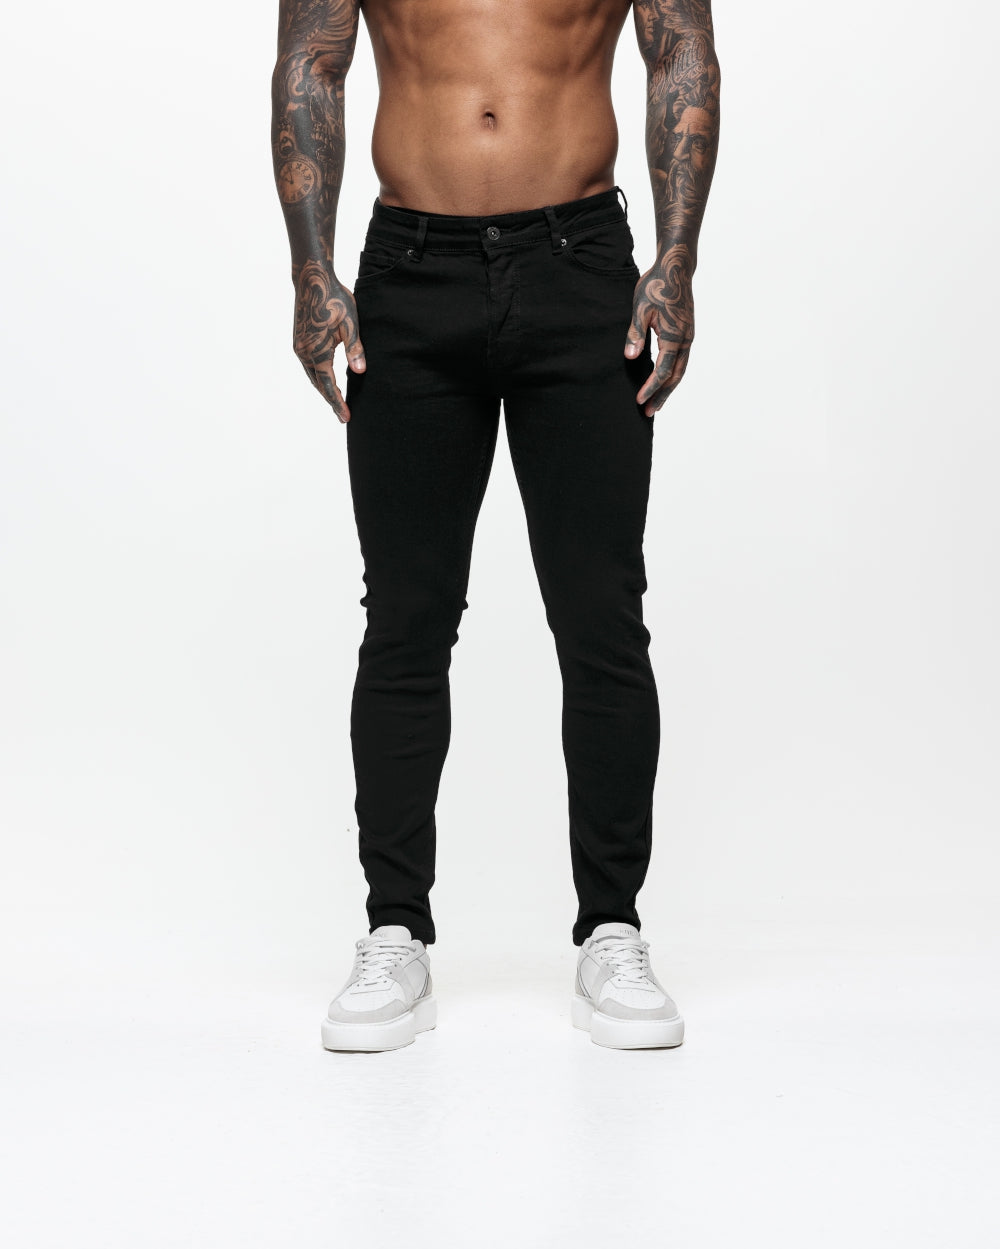 surf Oh falso Men's Jeans | Spray On Jeans & Skinny Jeans | Nimes